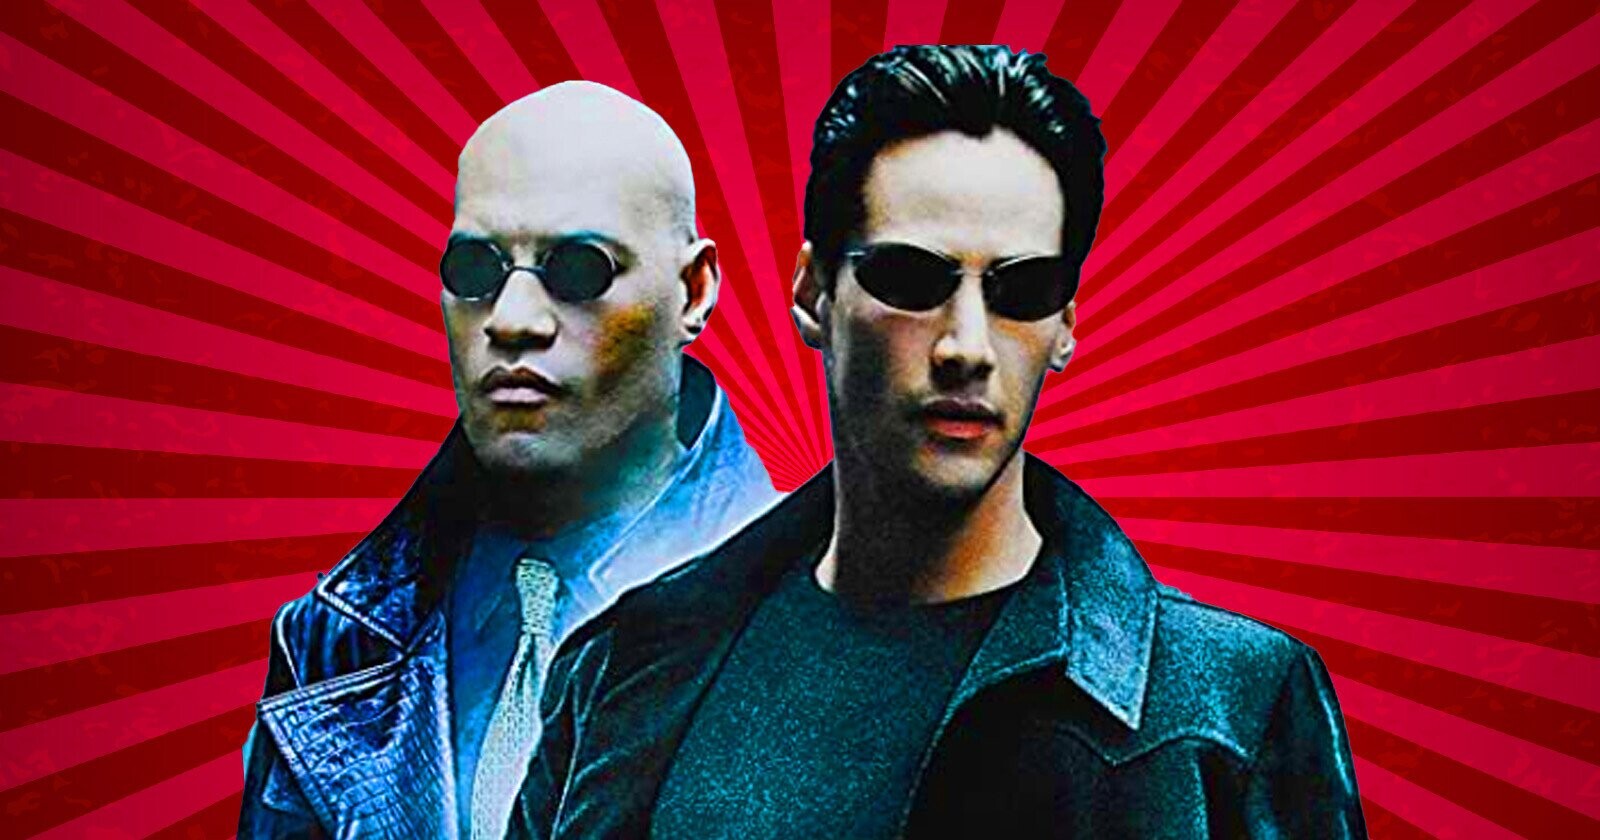 Morpheus and Neo Want to Make A Comedy That’s Not ‘Matrix: Resurrections’